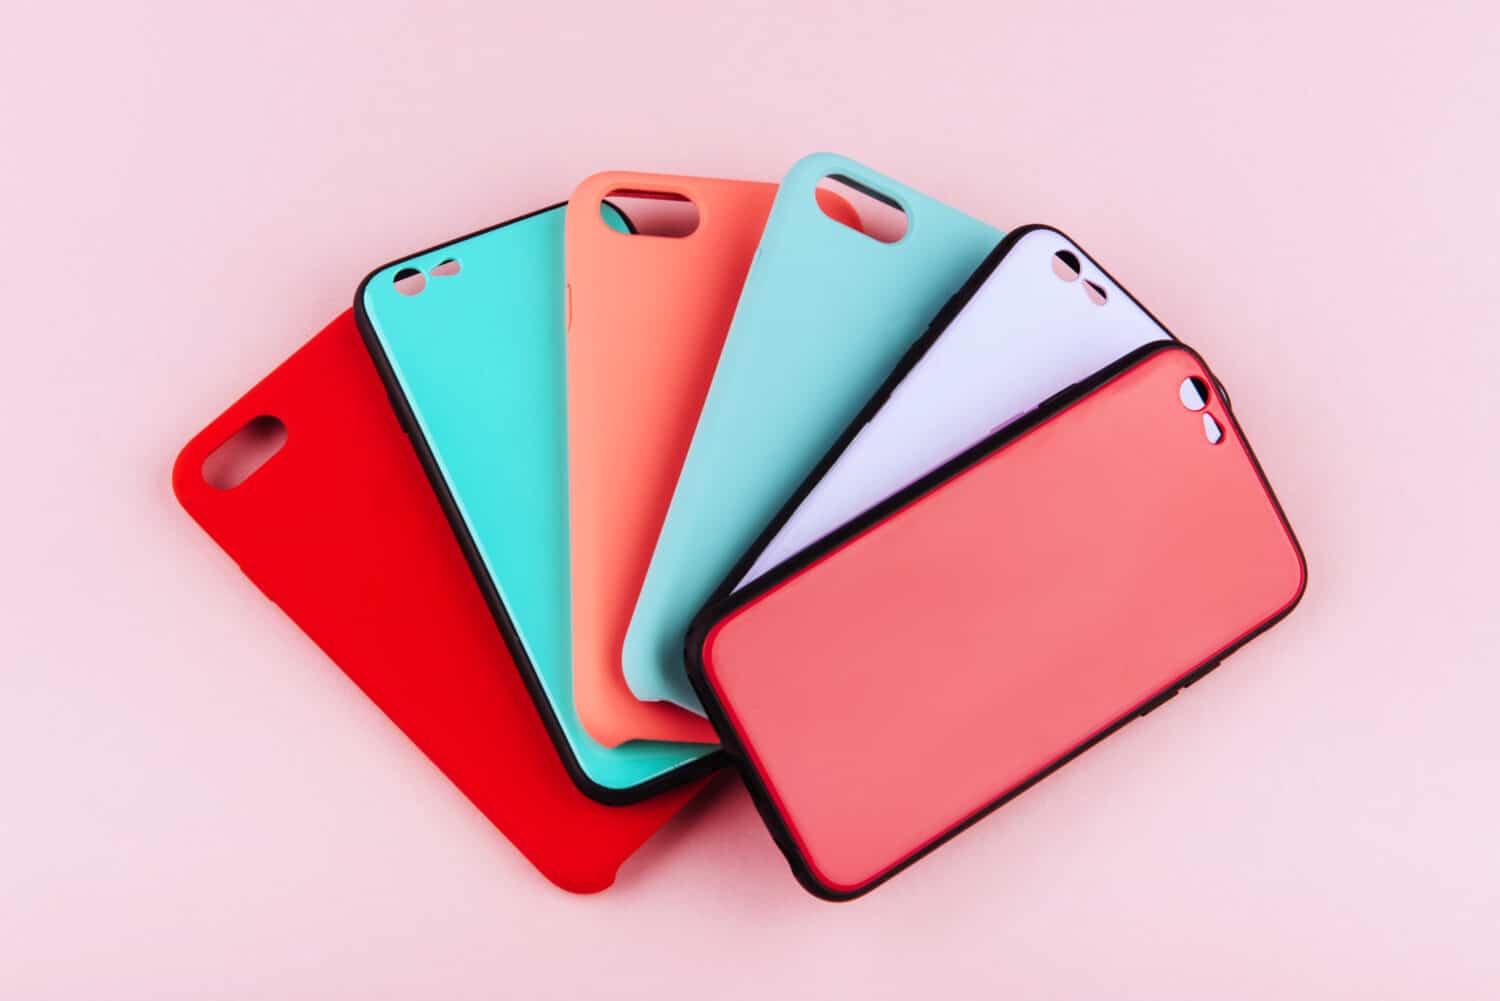 Set of colored silicone covers for smart phone on a colorful background